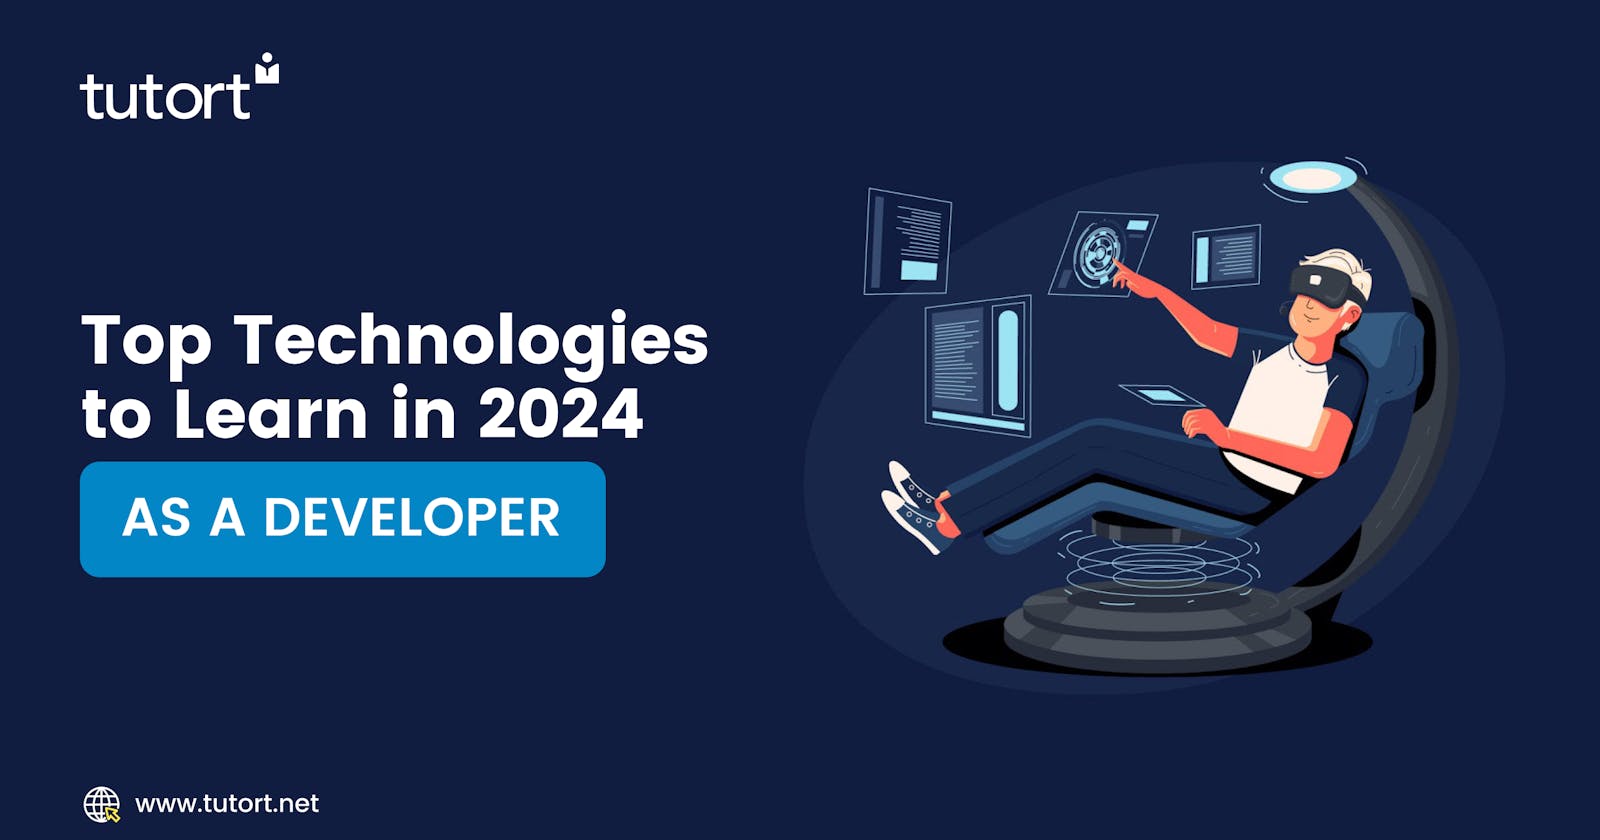 Must-Have Tech Skills for Developers in 2024